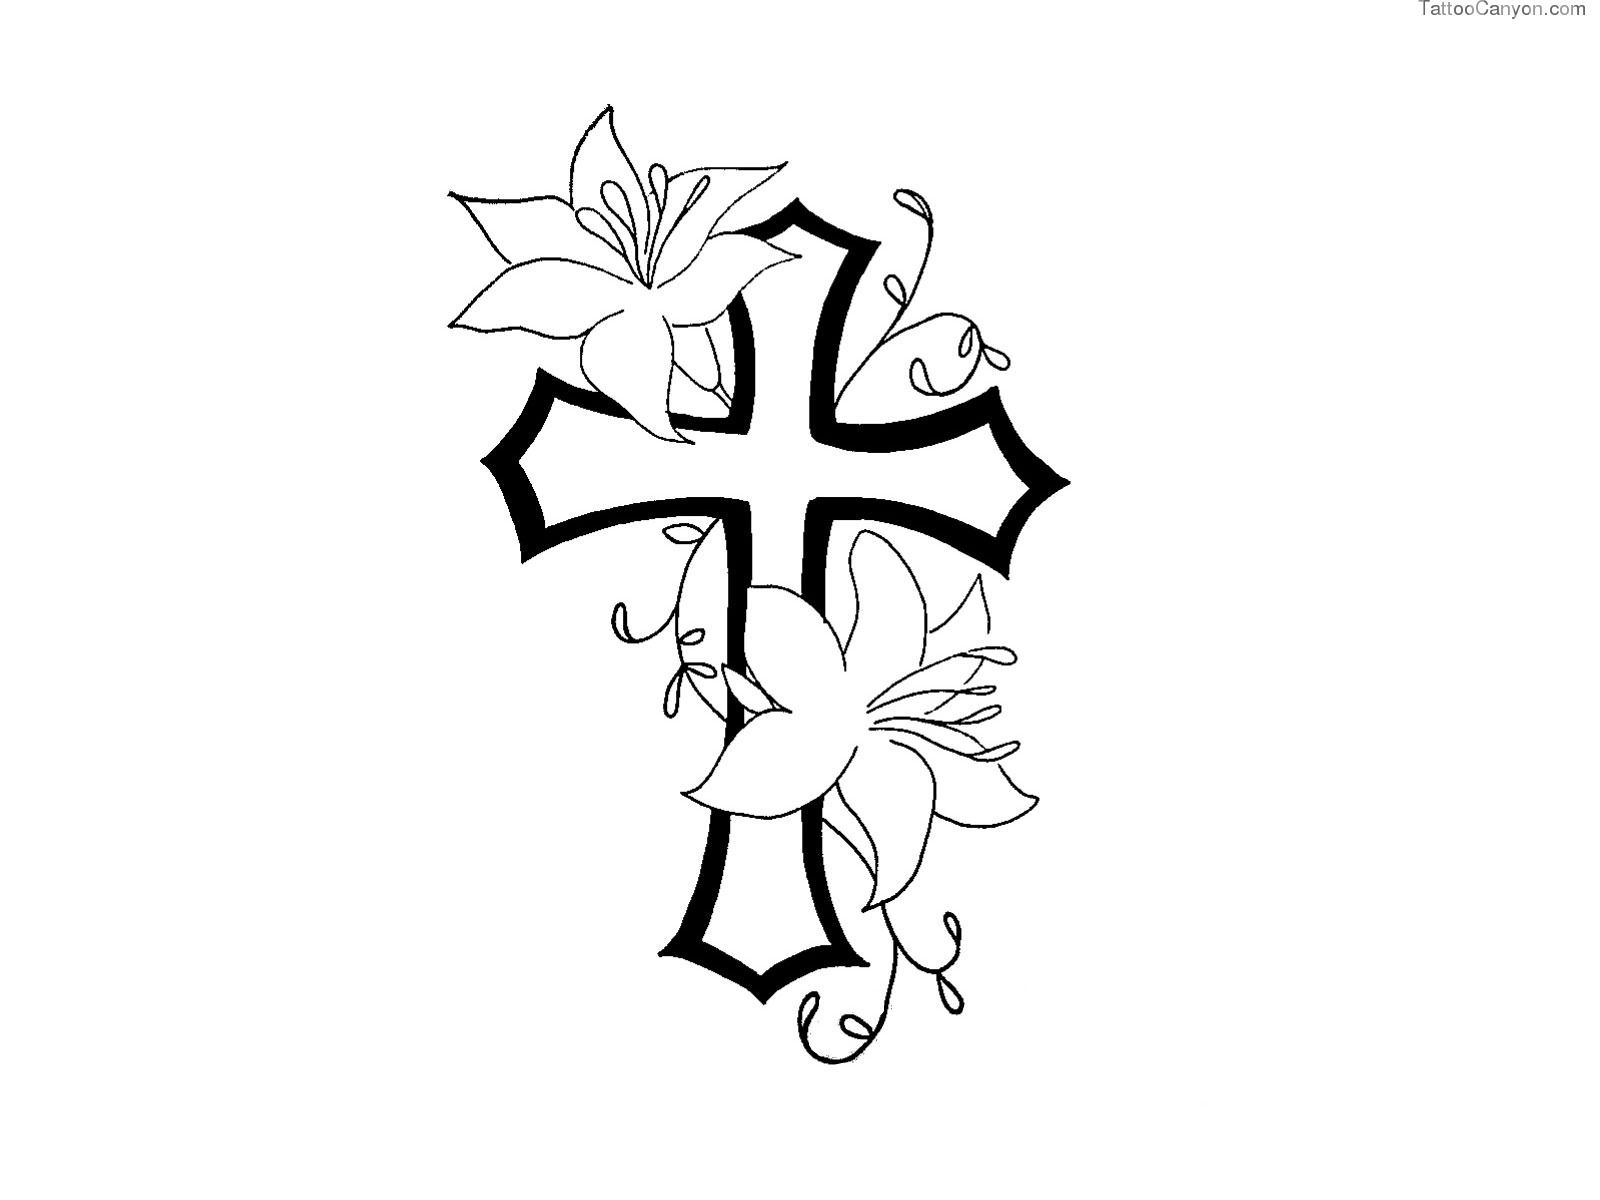 Free Designs Cross With Flower Contour Tattoo Wallpaper Picture intended for size 1600 X 1200